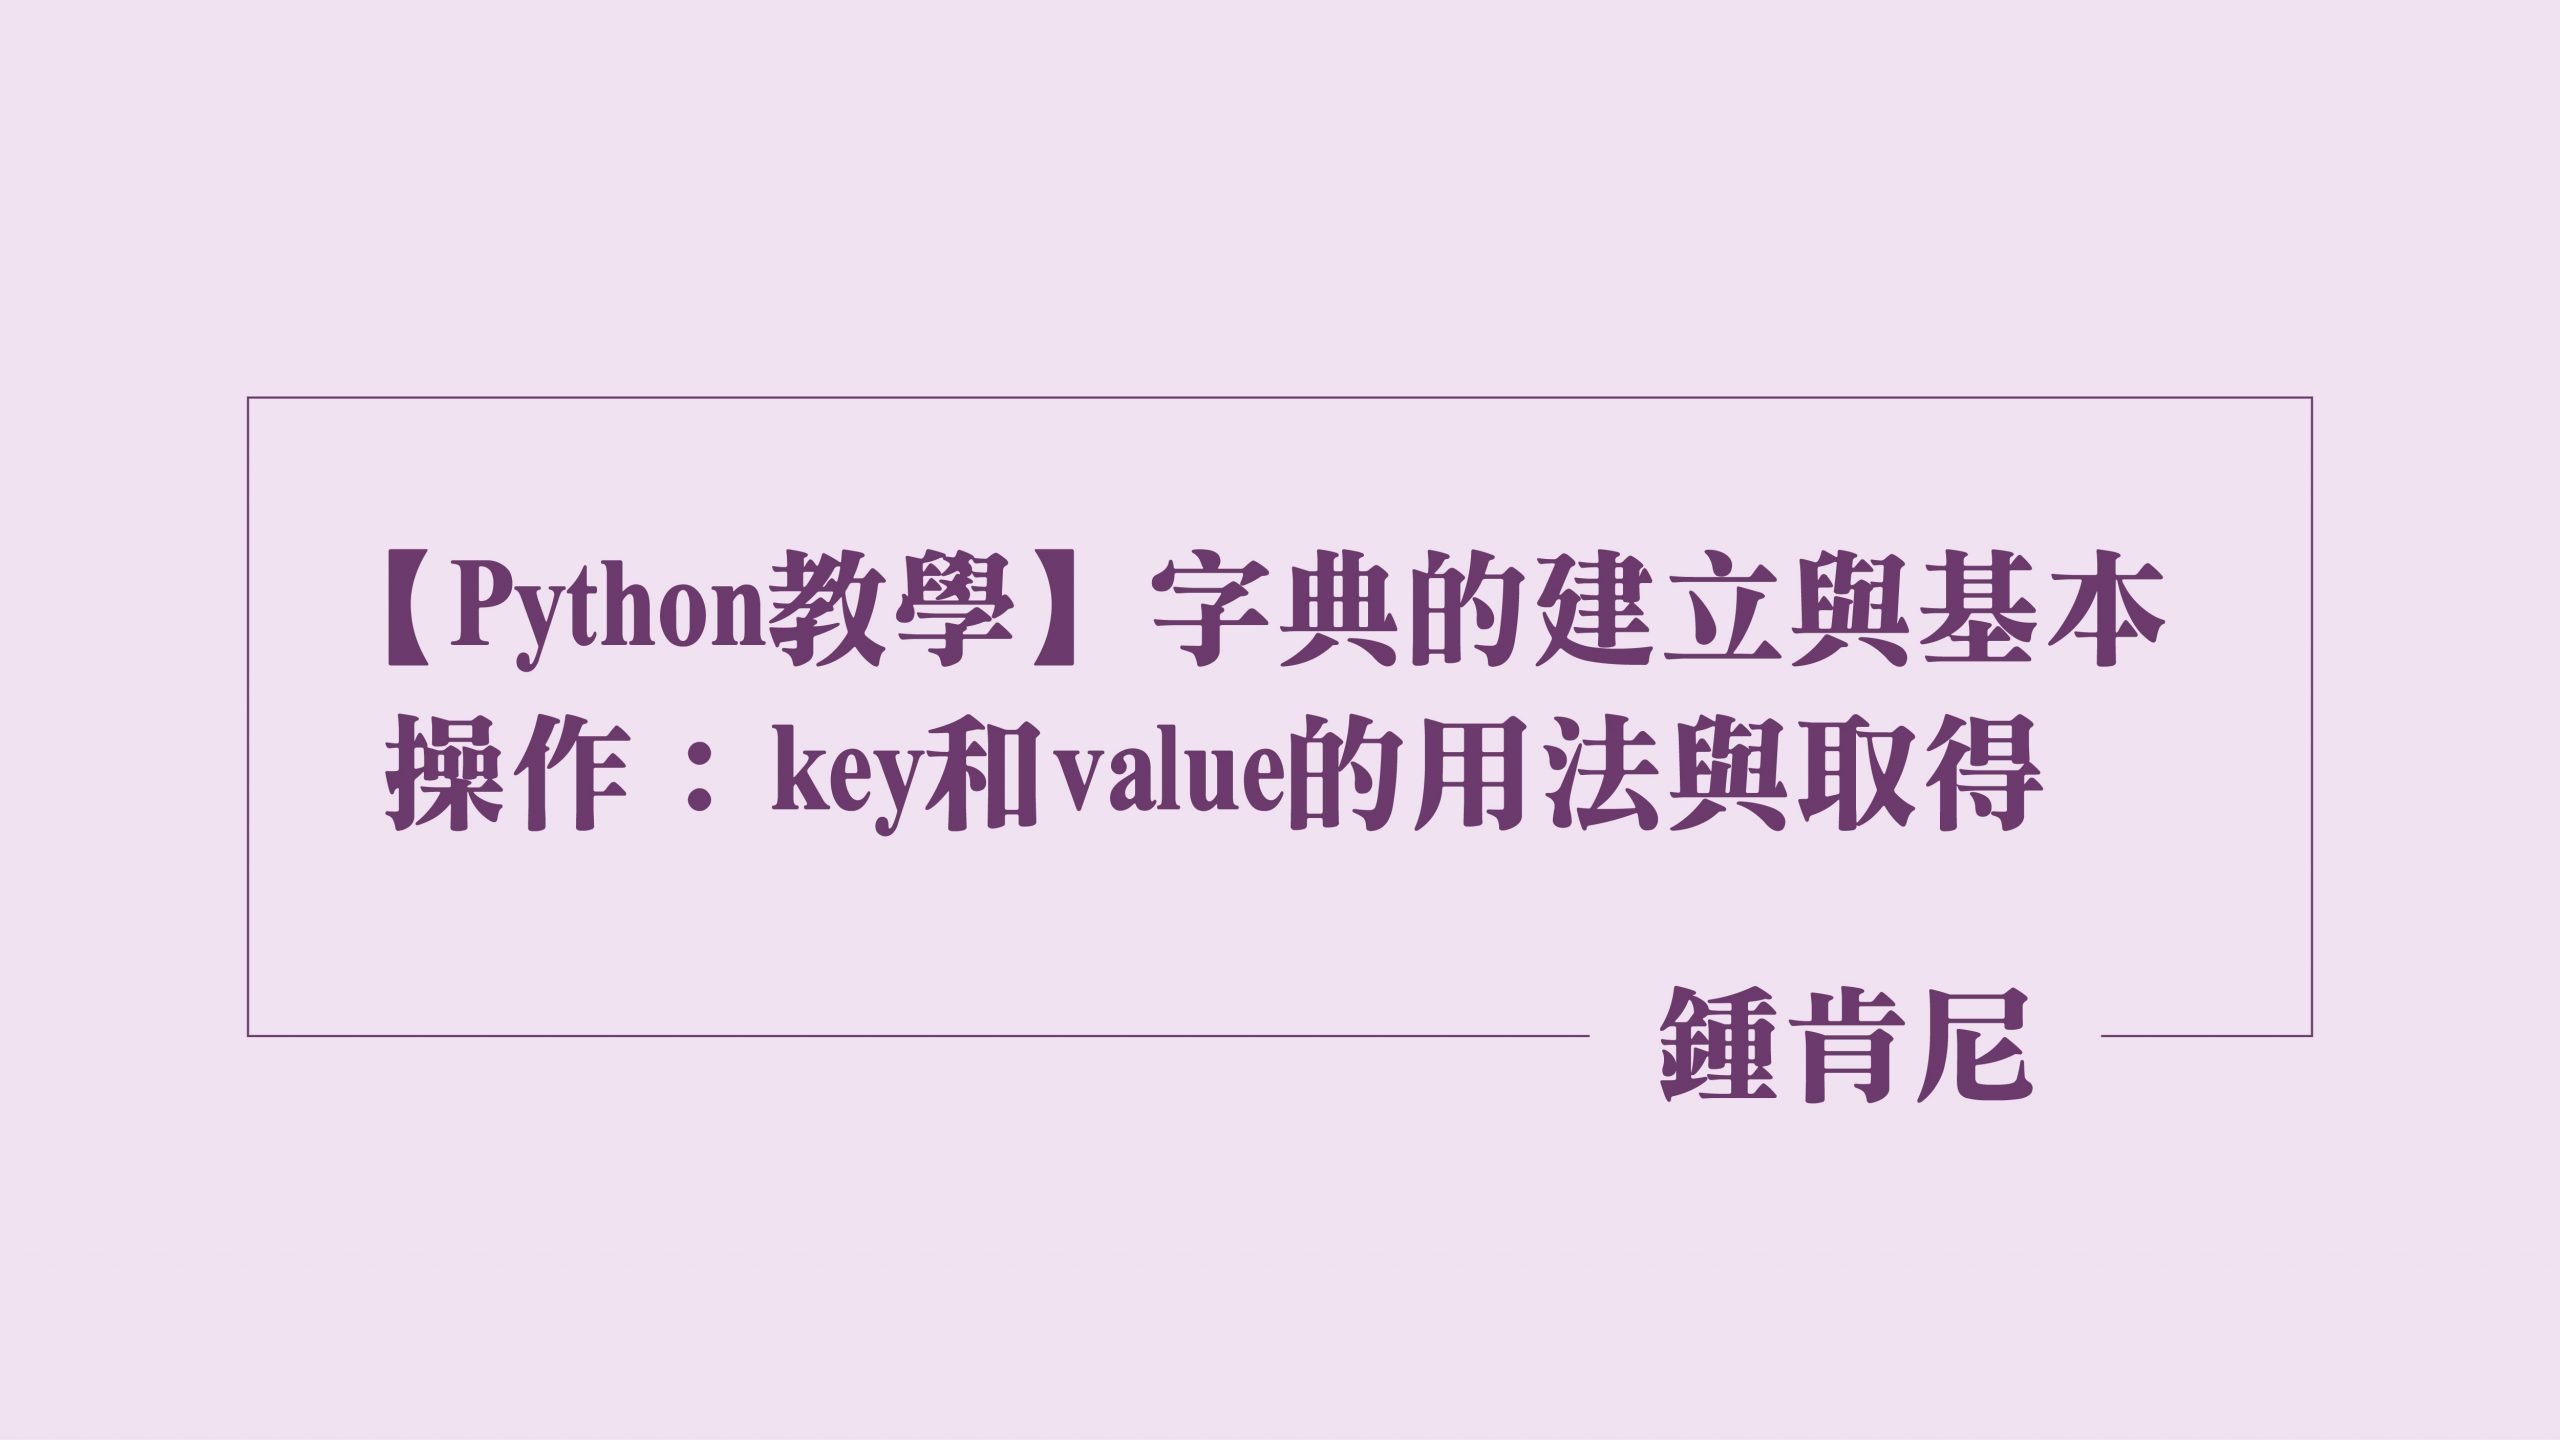 Read more about the article 【Python教學】字典（dictionary）的建立與基本操作：key和value的用法與取得